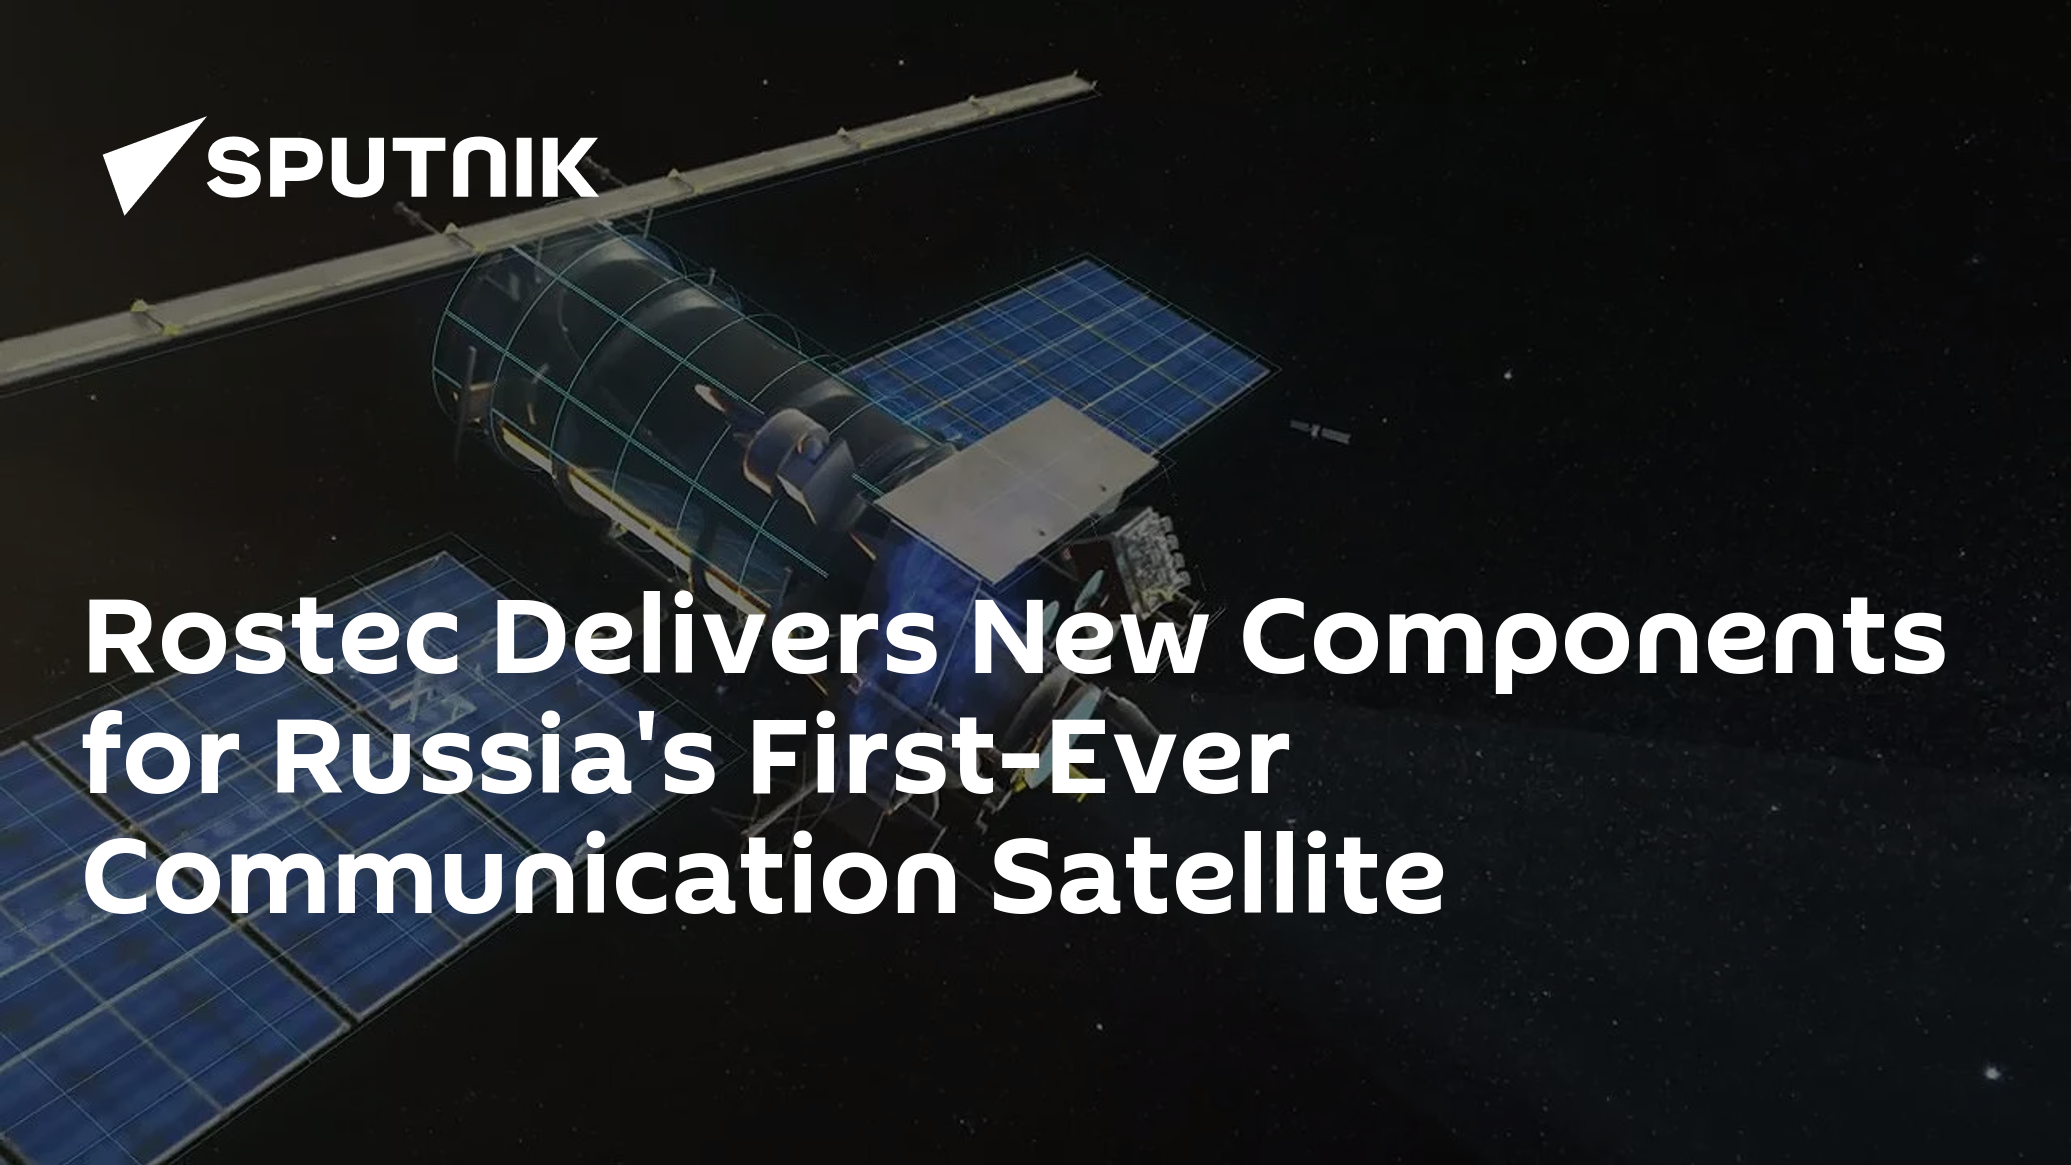 Rostec Delivers New Components for Russia's First-Ever Communication Satellite